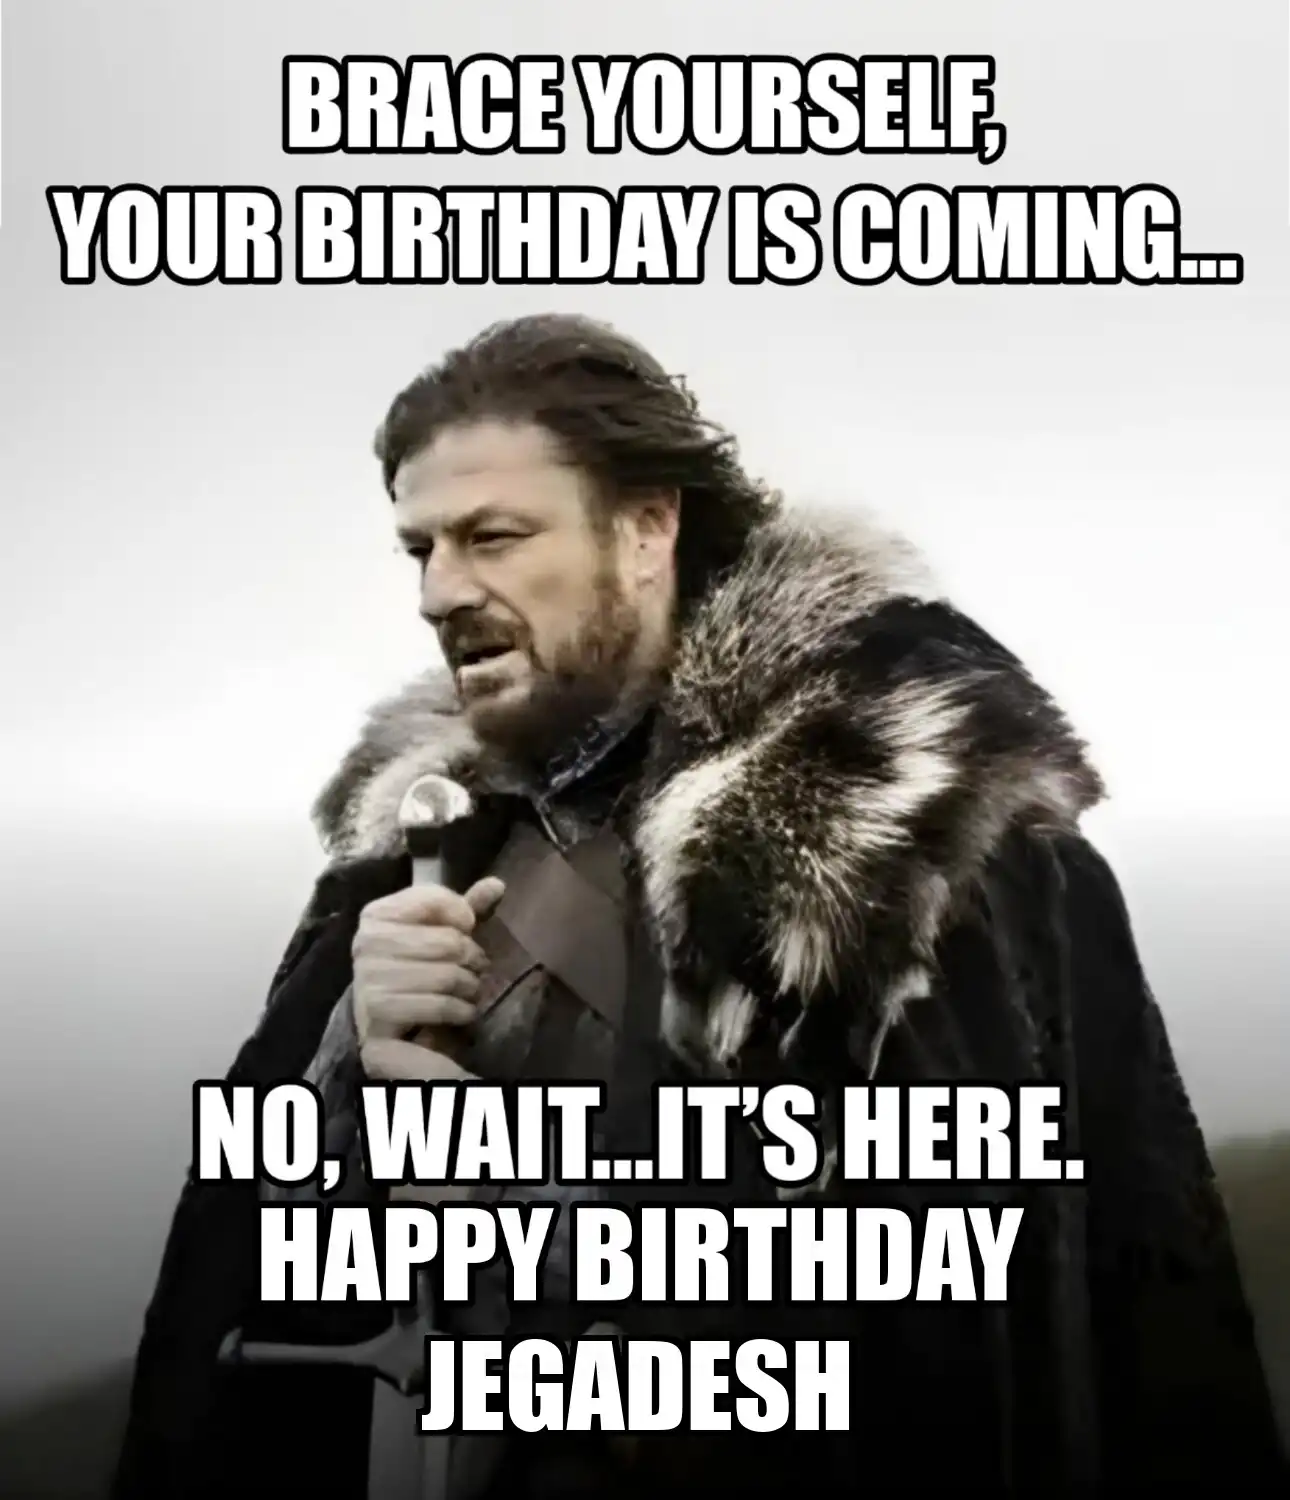 Happy Birthday Jegadesh Brace Yourself Your Birthday Is Coming Meme